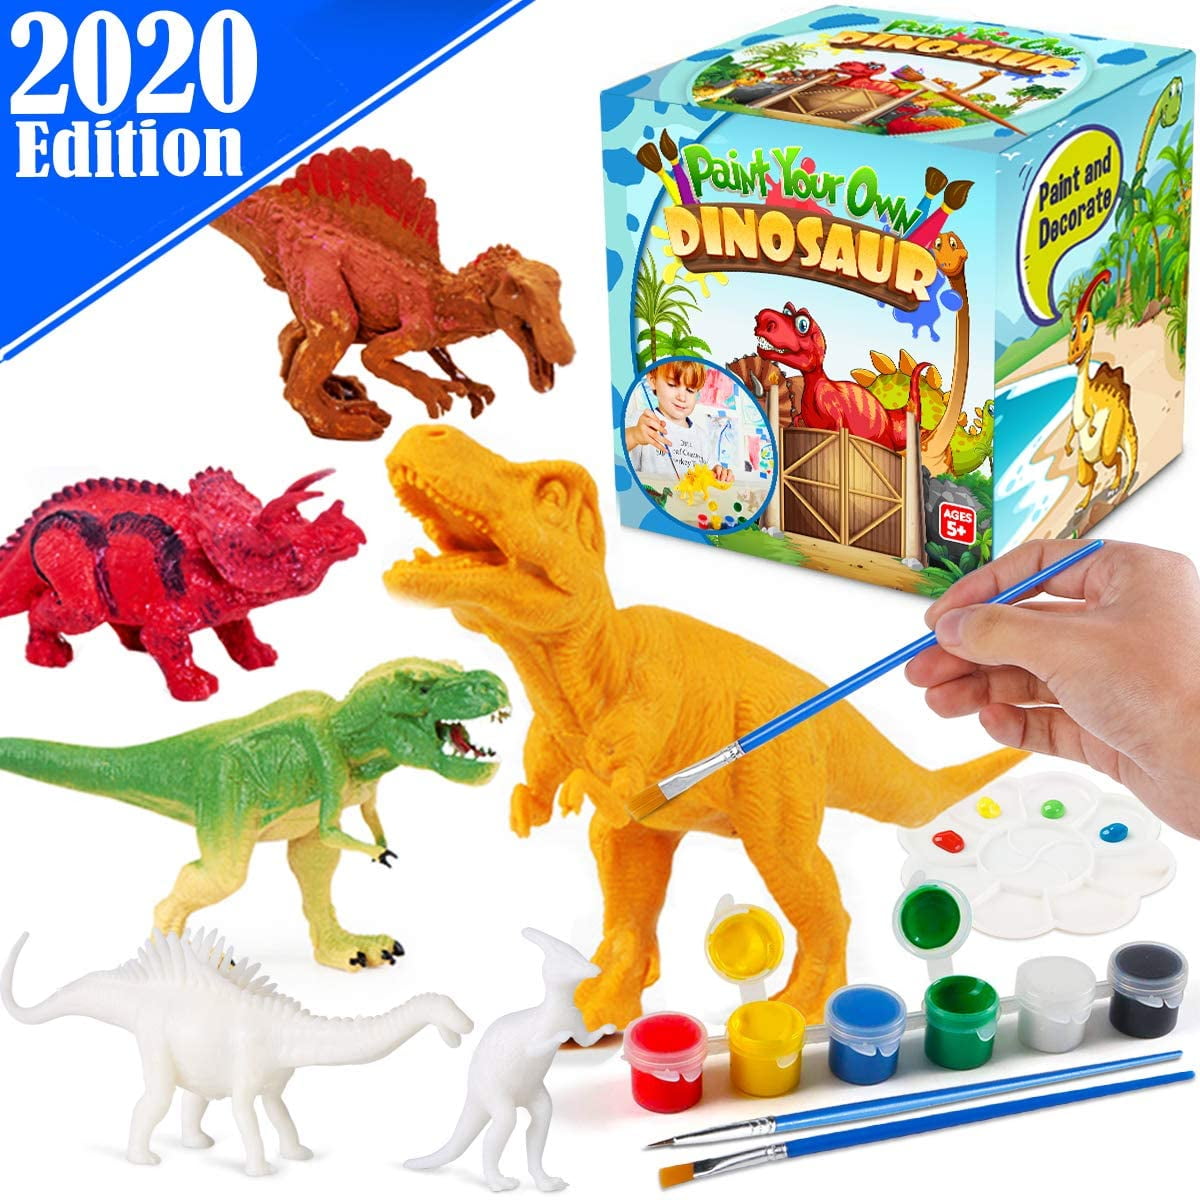 TICE Painting Dinosaurs for Kids DIY Dinosaur Arts Crafts Gift for Boys Girls Kids